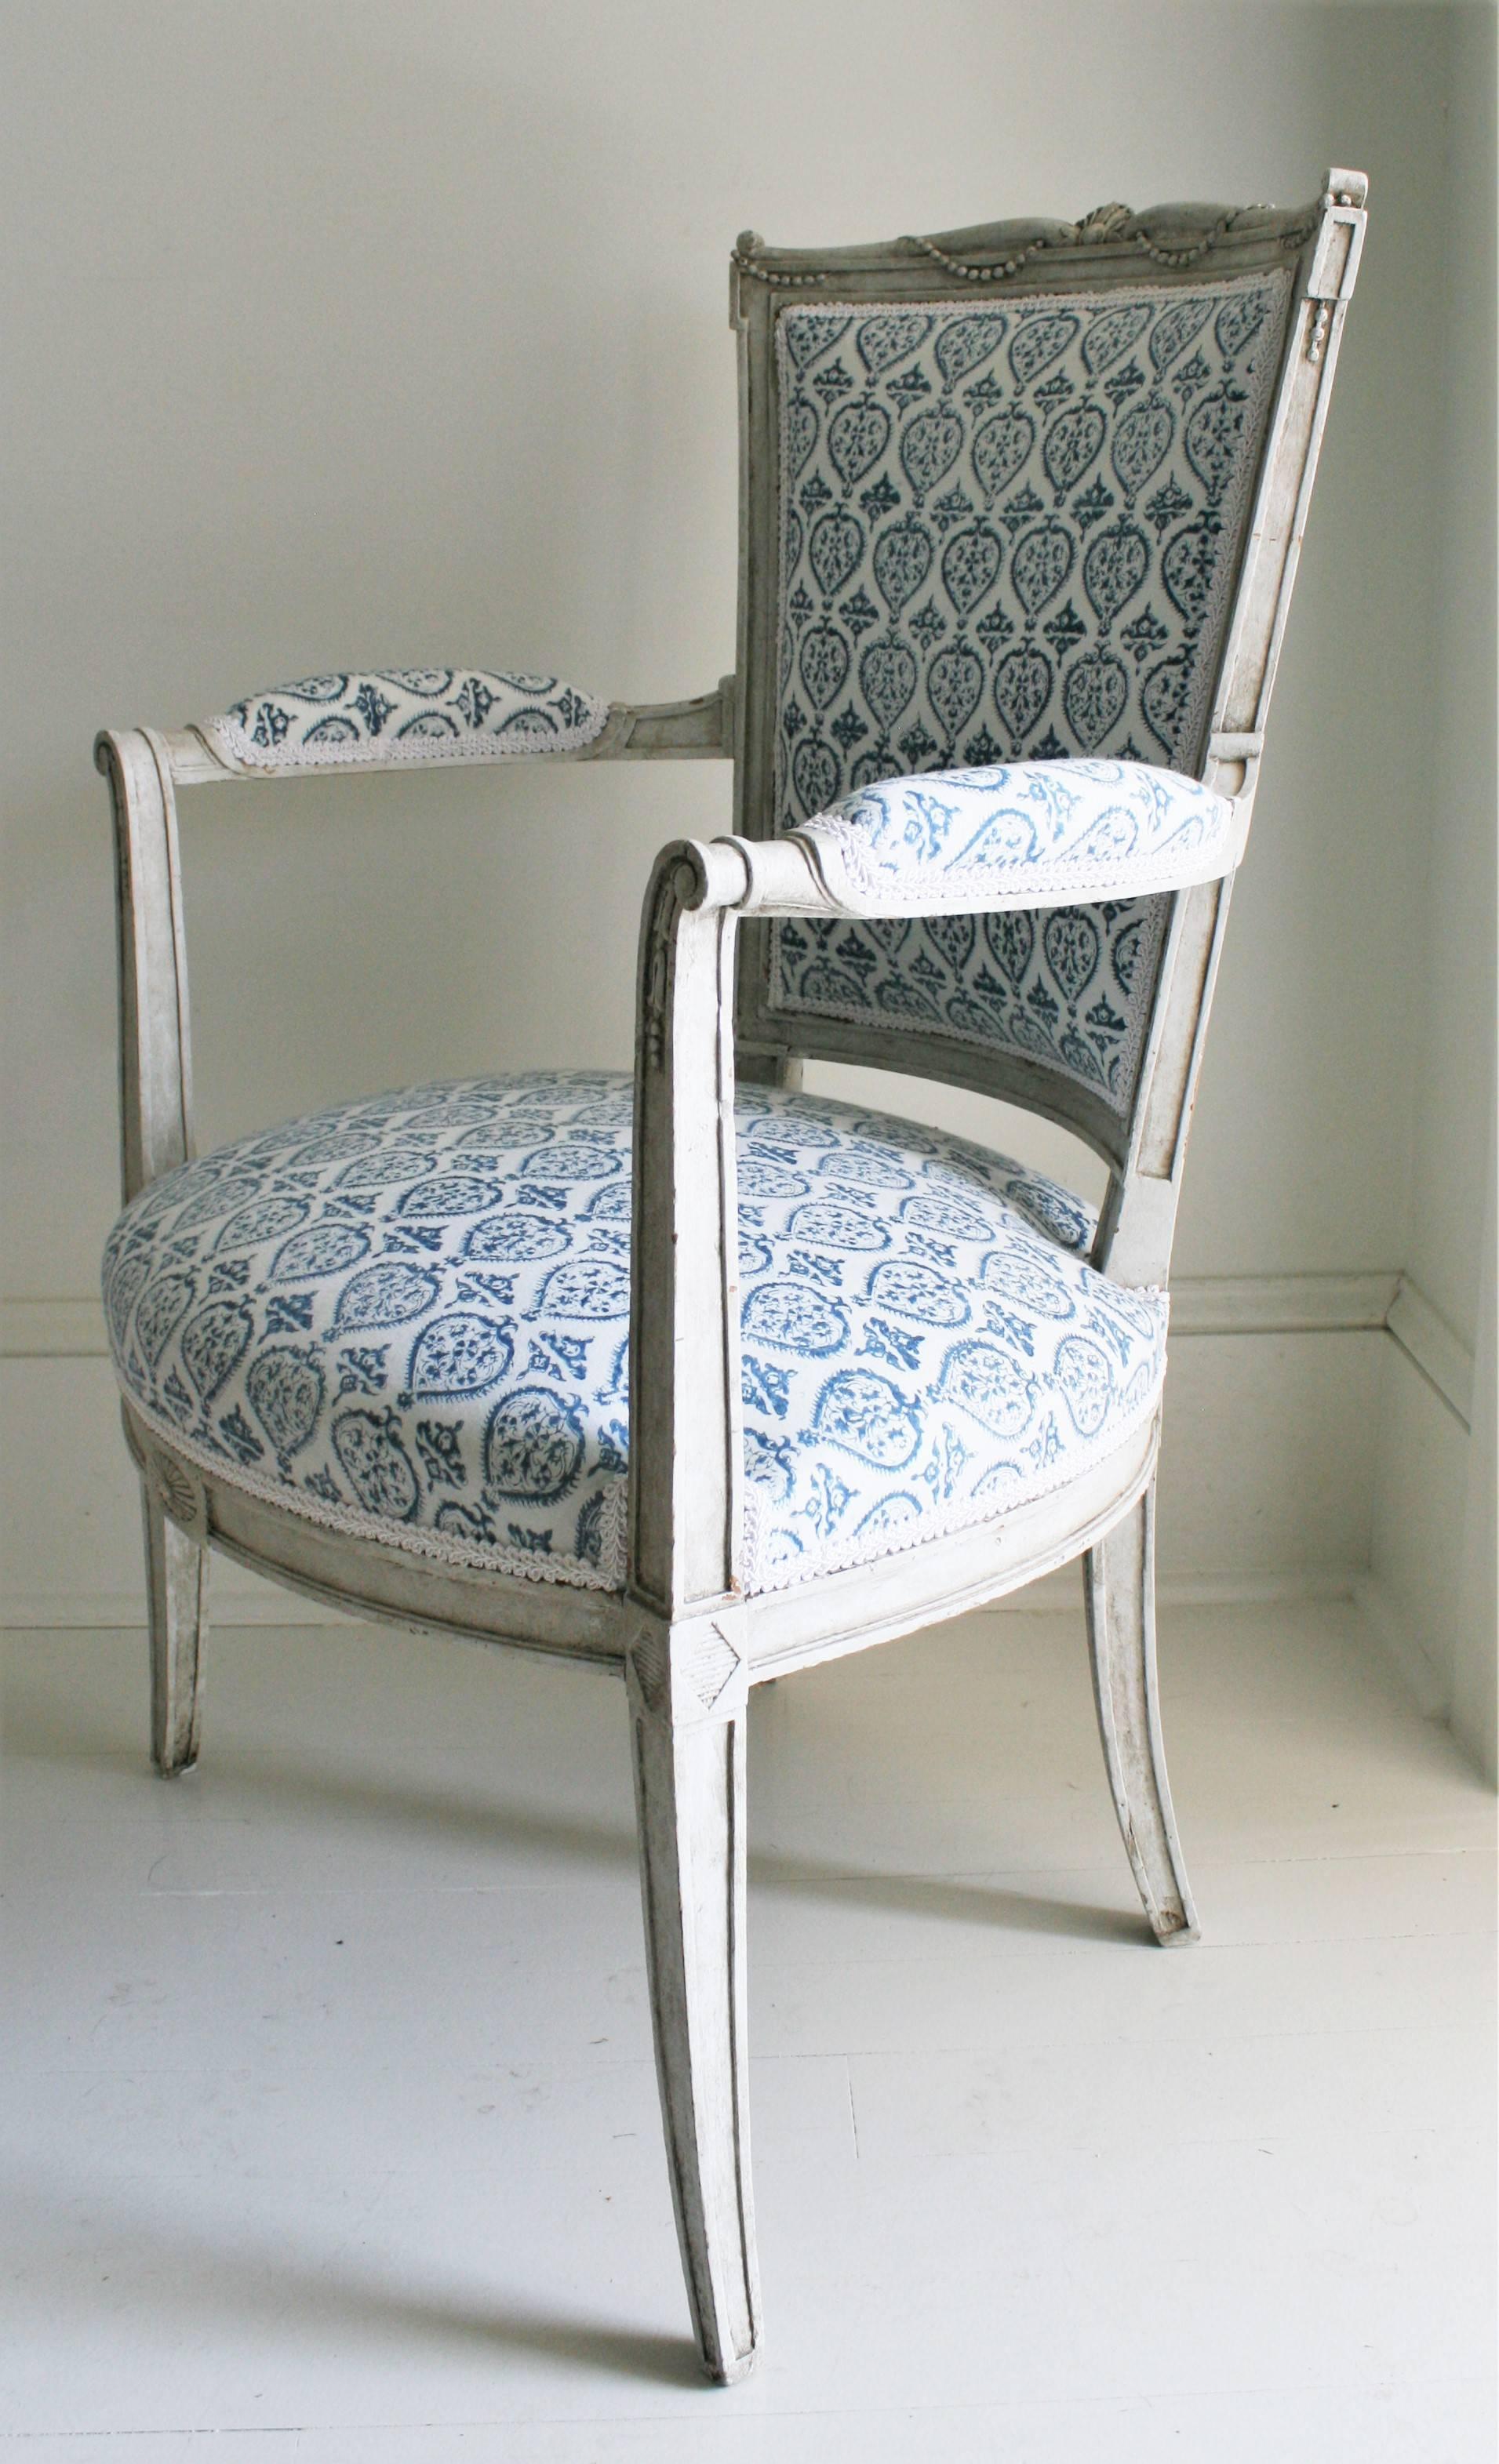 Late 19th Century French Empire Style Painted Armchair in French-Indie Fabric 5